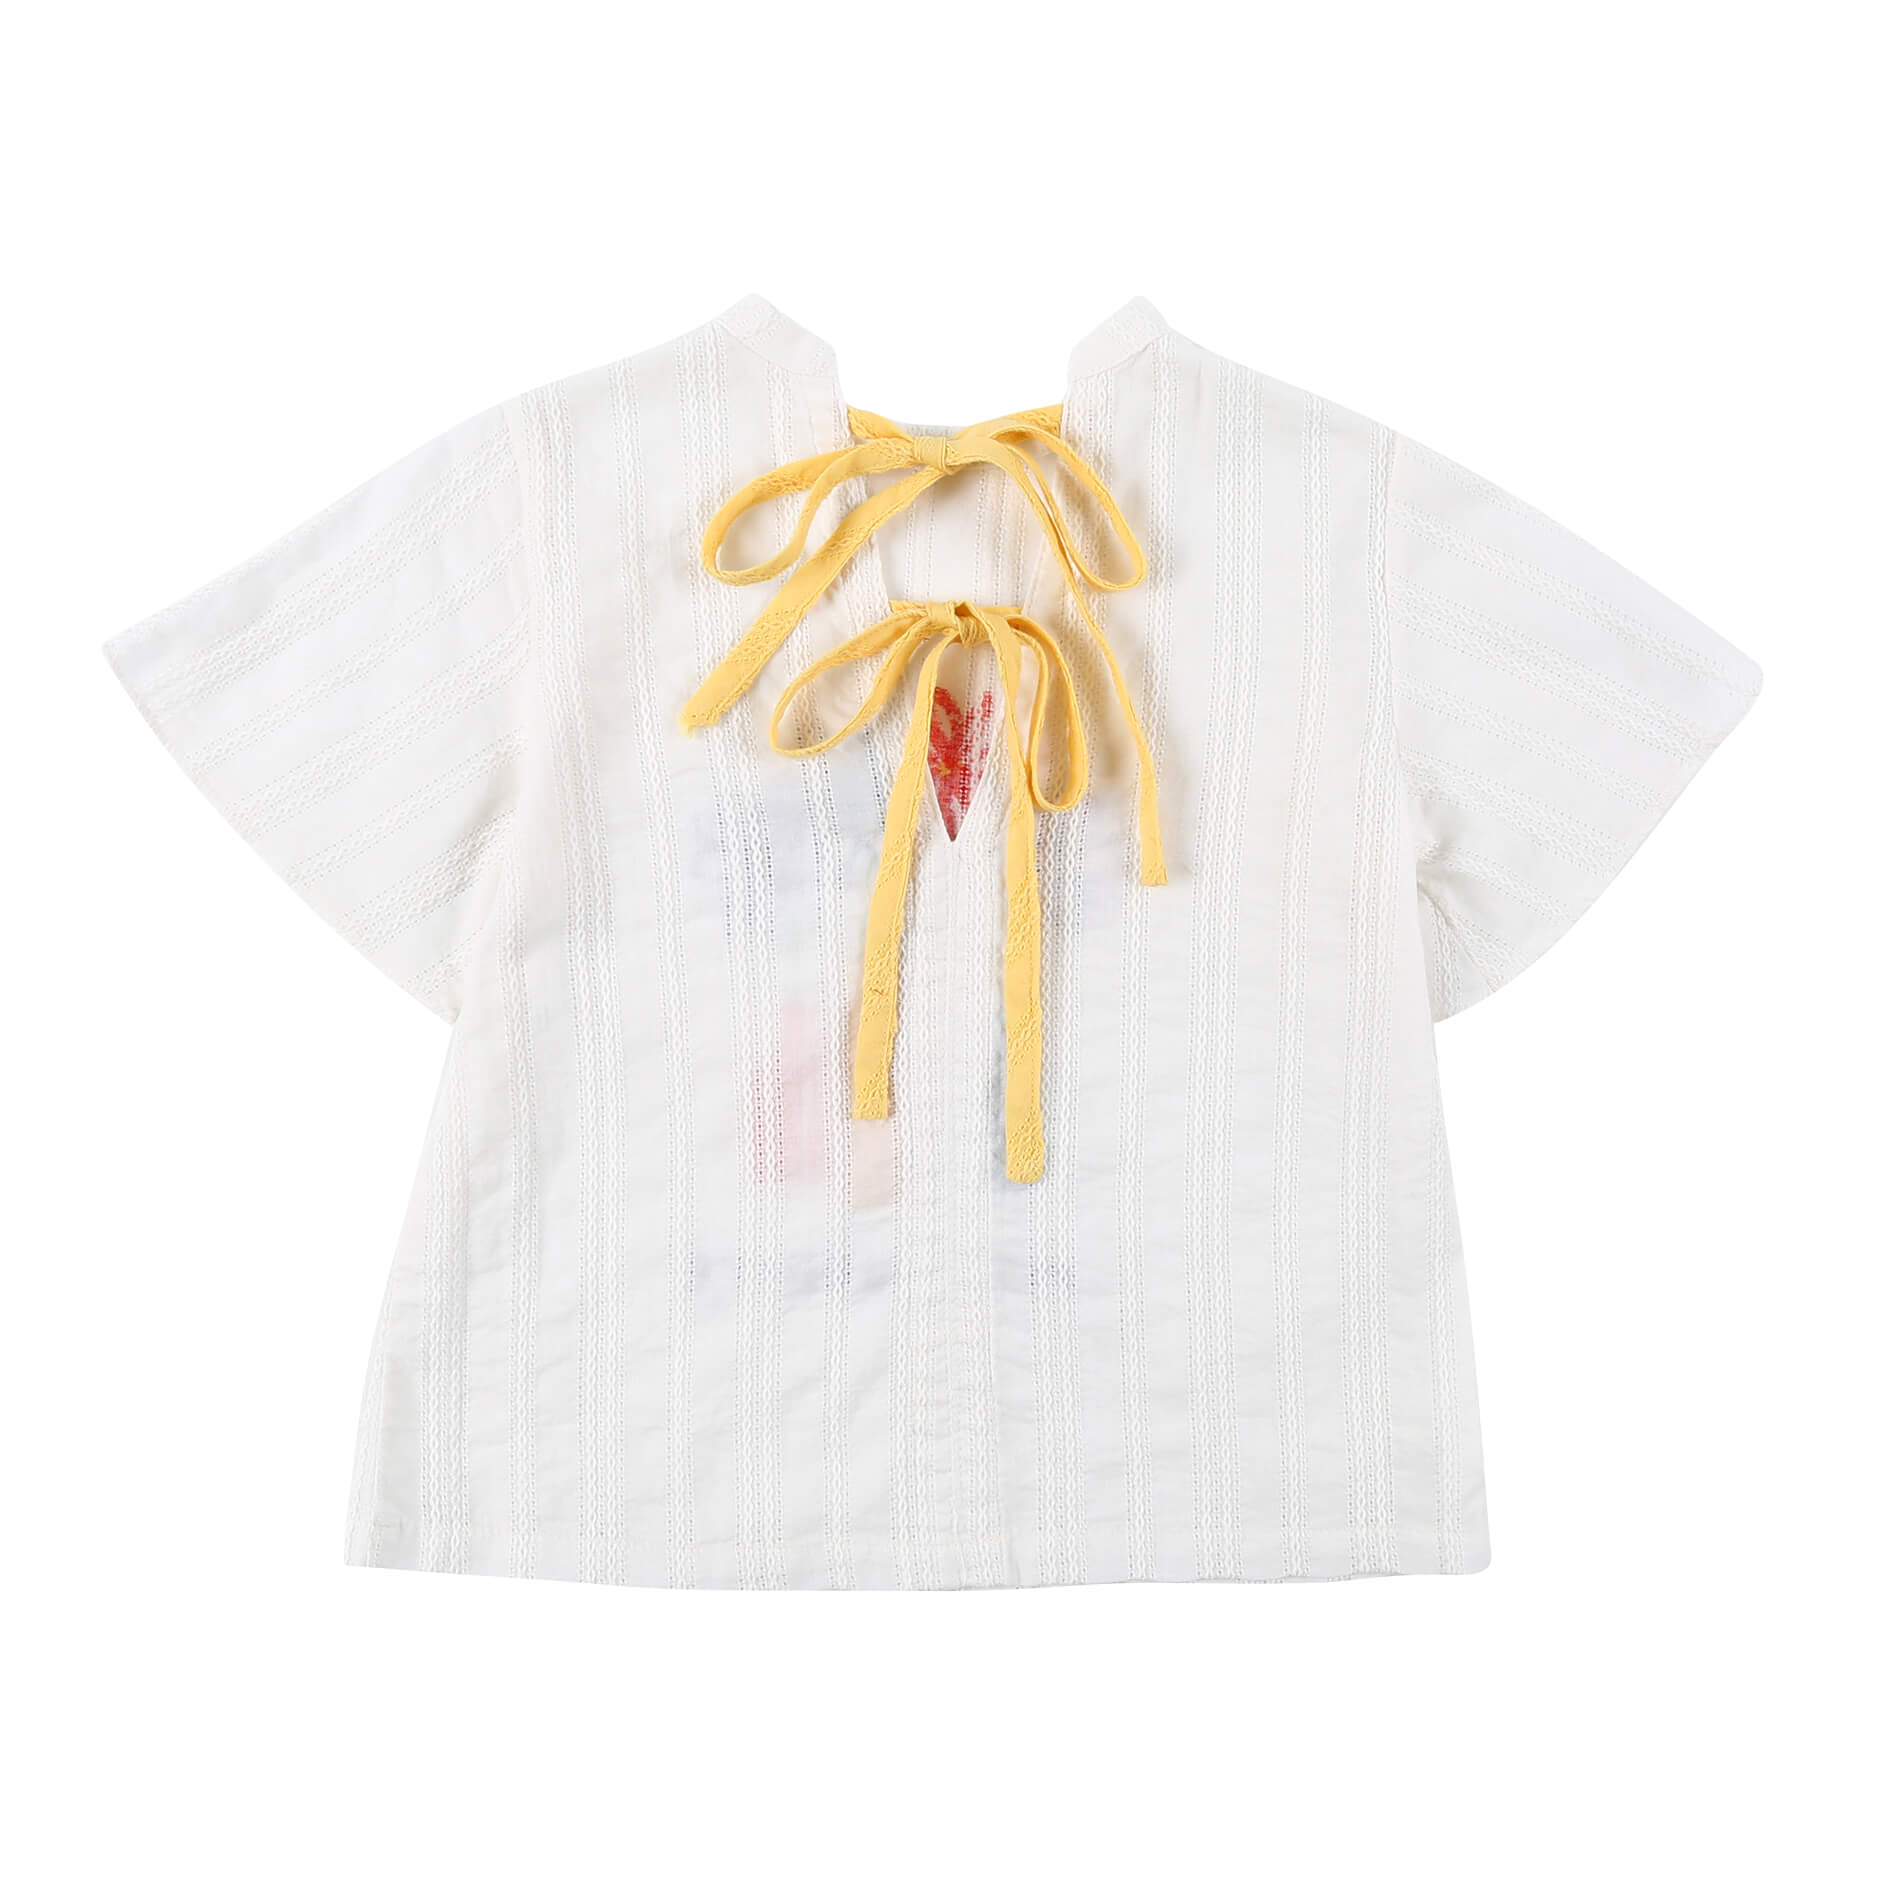 Girls White Embroidered Cotton T-Shirt